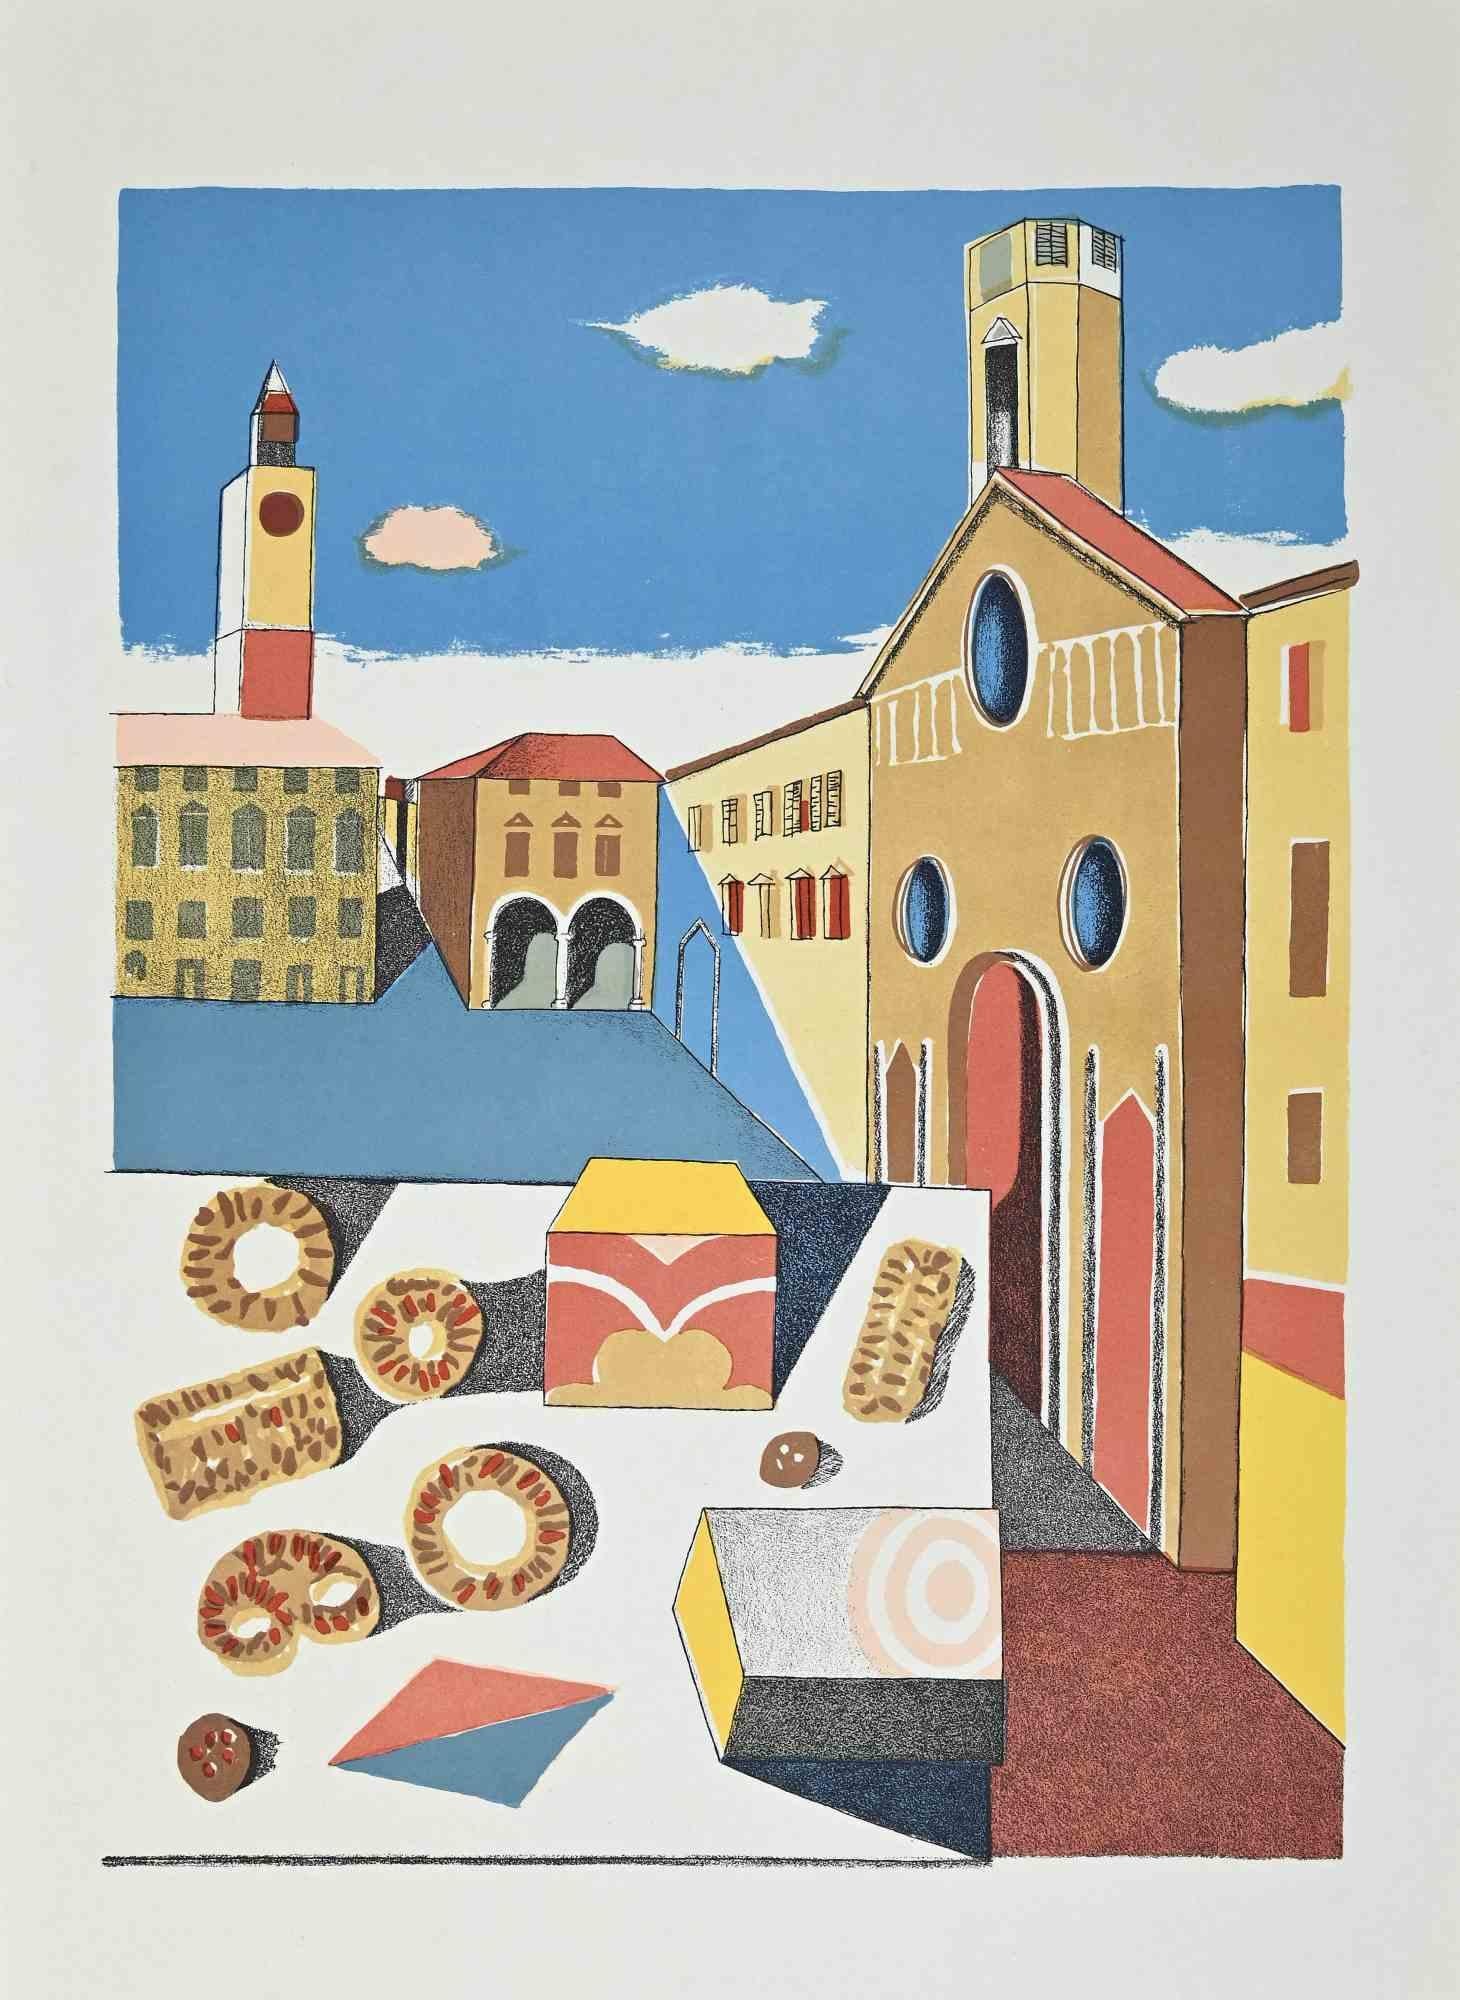 The Cathedral is a Vintage Offset Print on ivory-colored paper, realized by  Franco Gentilini (Italian Painter, 1909-1981), in the 1970s.

The state of preservation of the artwork is excellent.

Franco Gentilini (Italian Painter, 1909-1981):